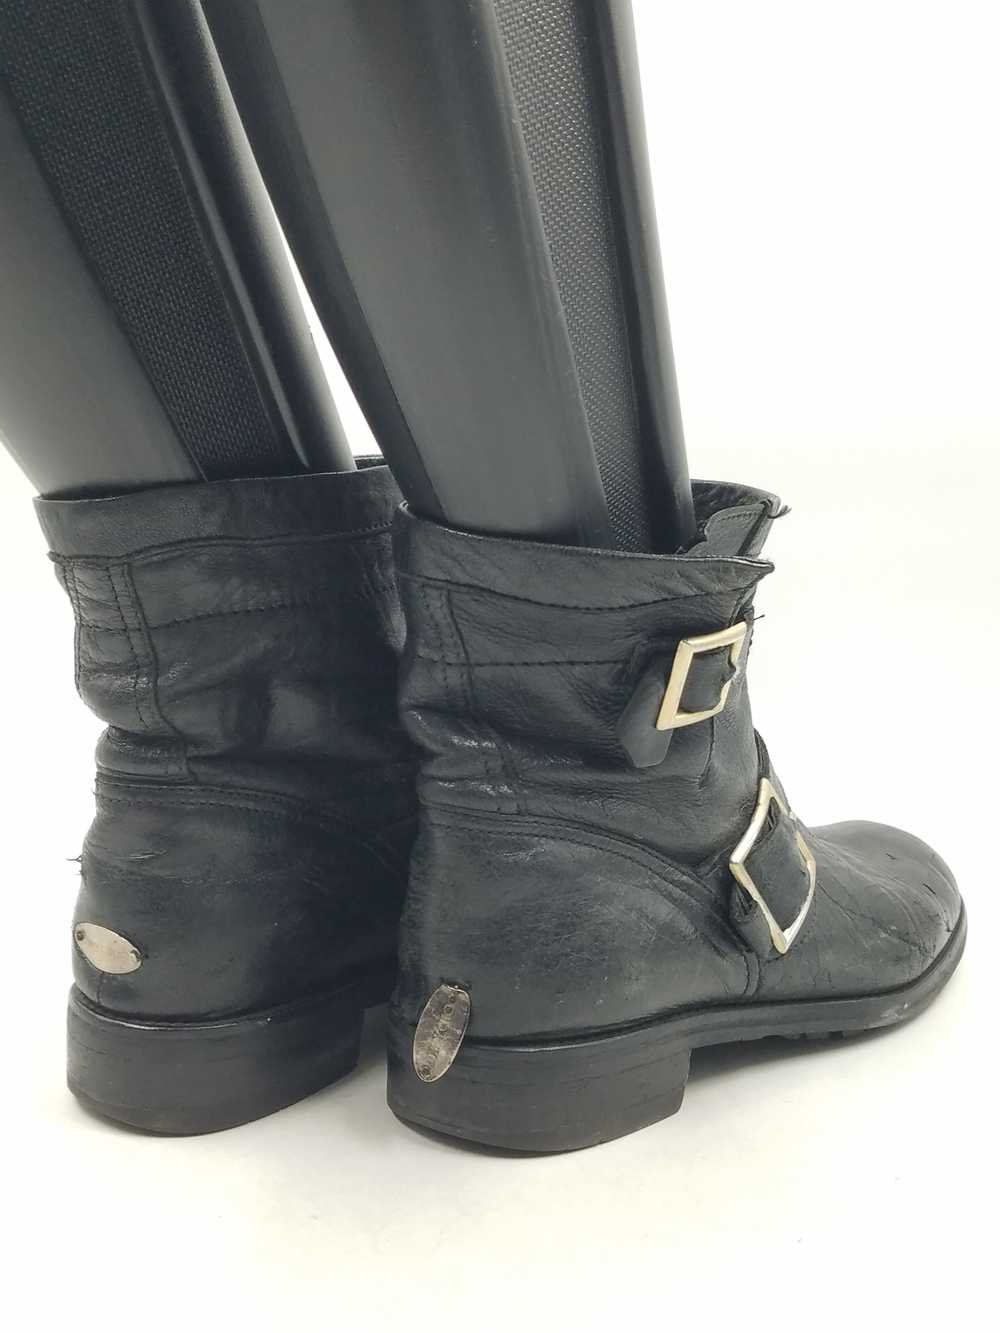 Authentic Jimmy Choo Black Engineer Boot W 8 - image 4